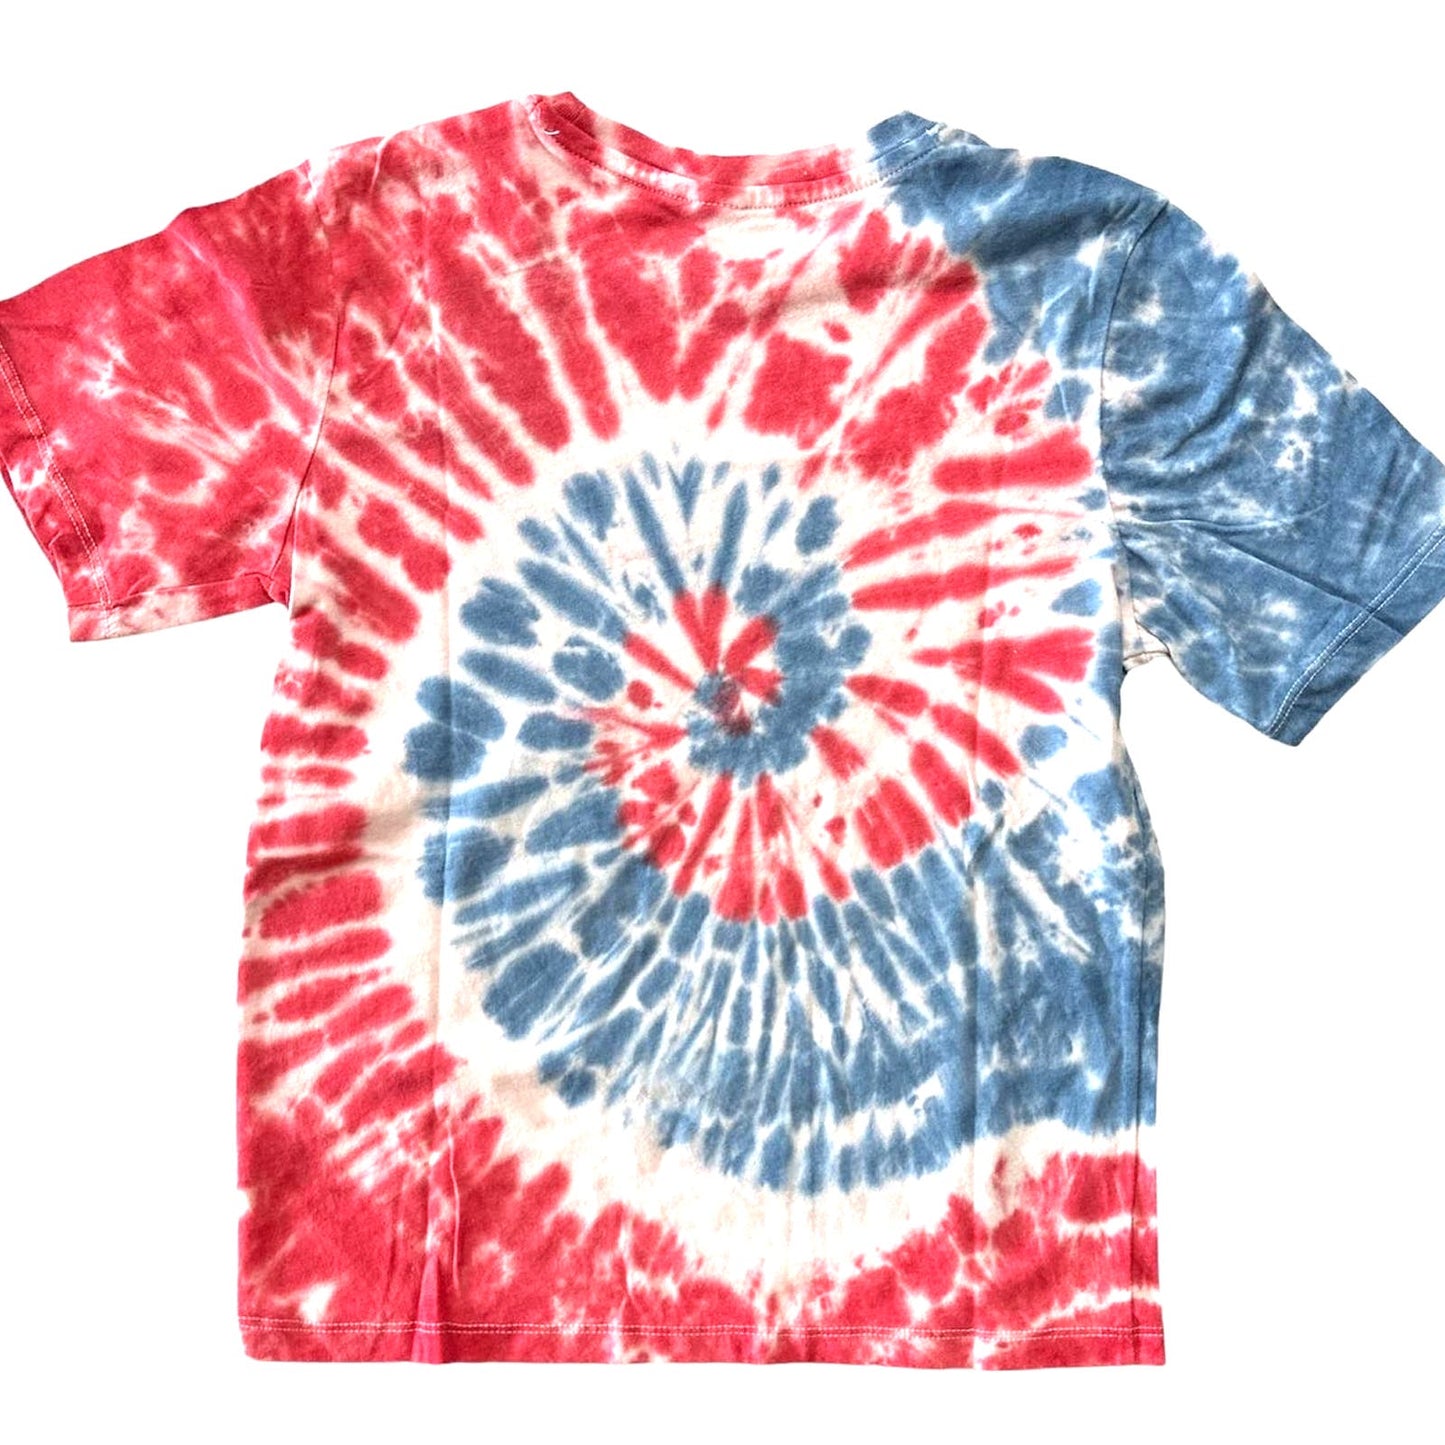 Boy's 10/12 Rolling Stones Tie Dyed Graphic Tees NWT